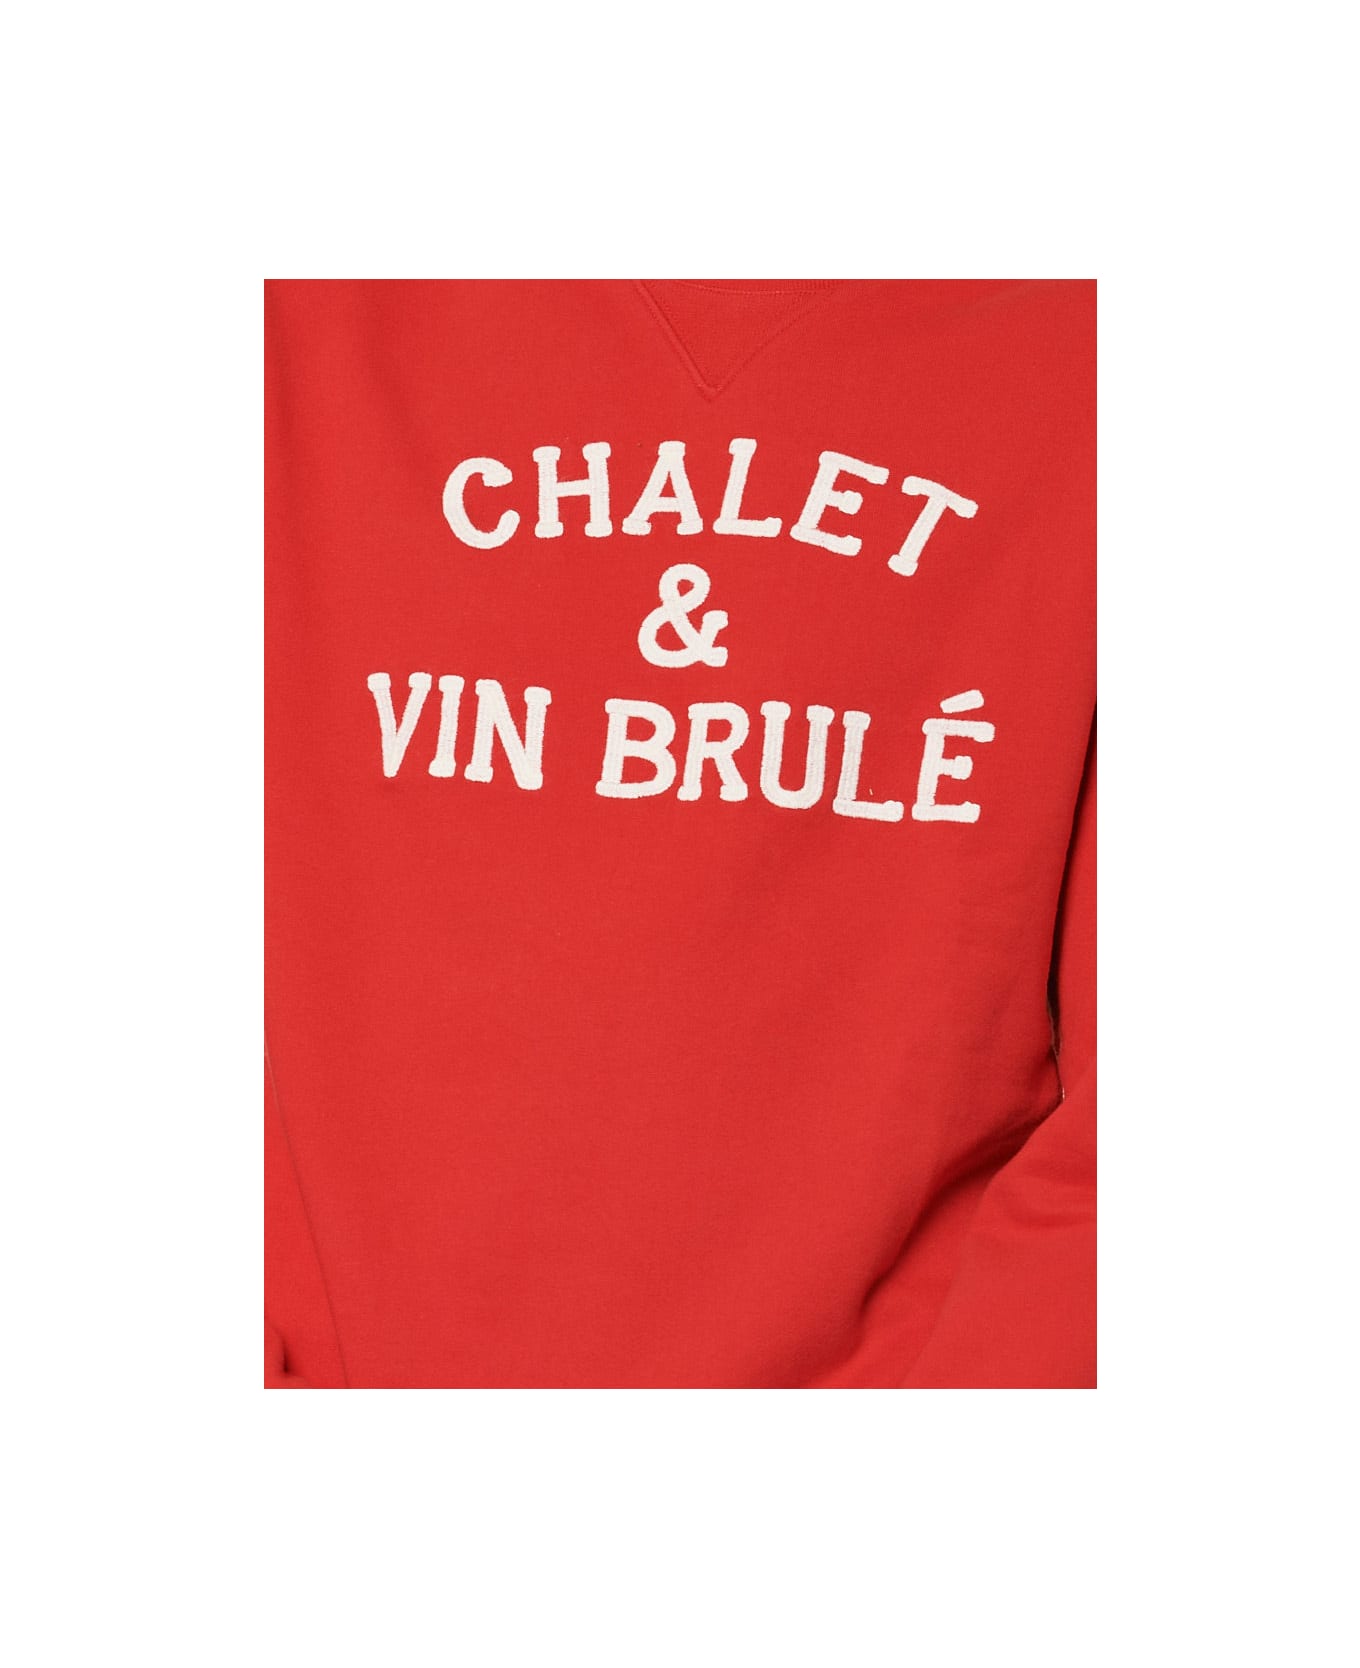 MC2 Saint Barth Chalet & Vin Brulè Terry Patch Embroidery Sweatshirt - RED